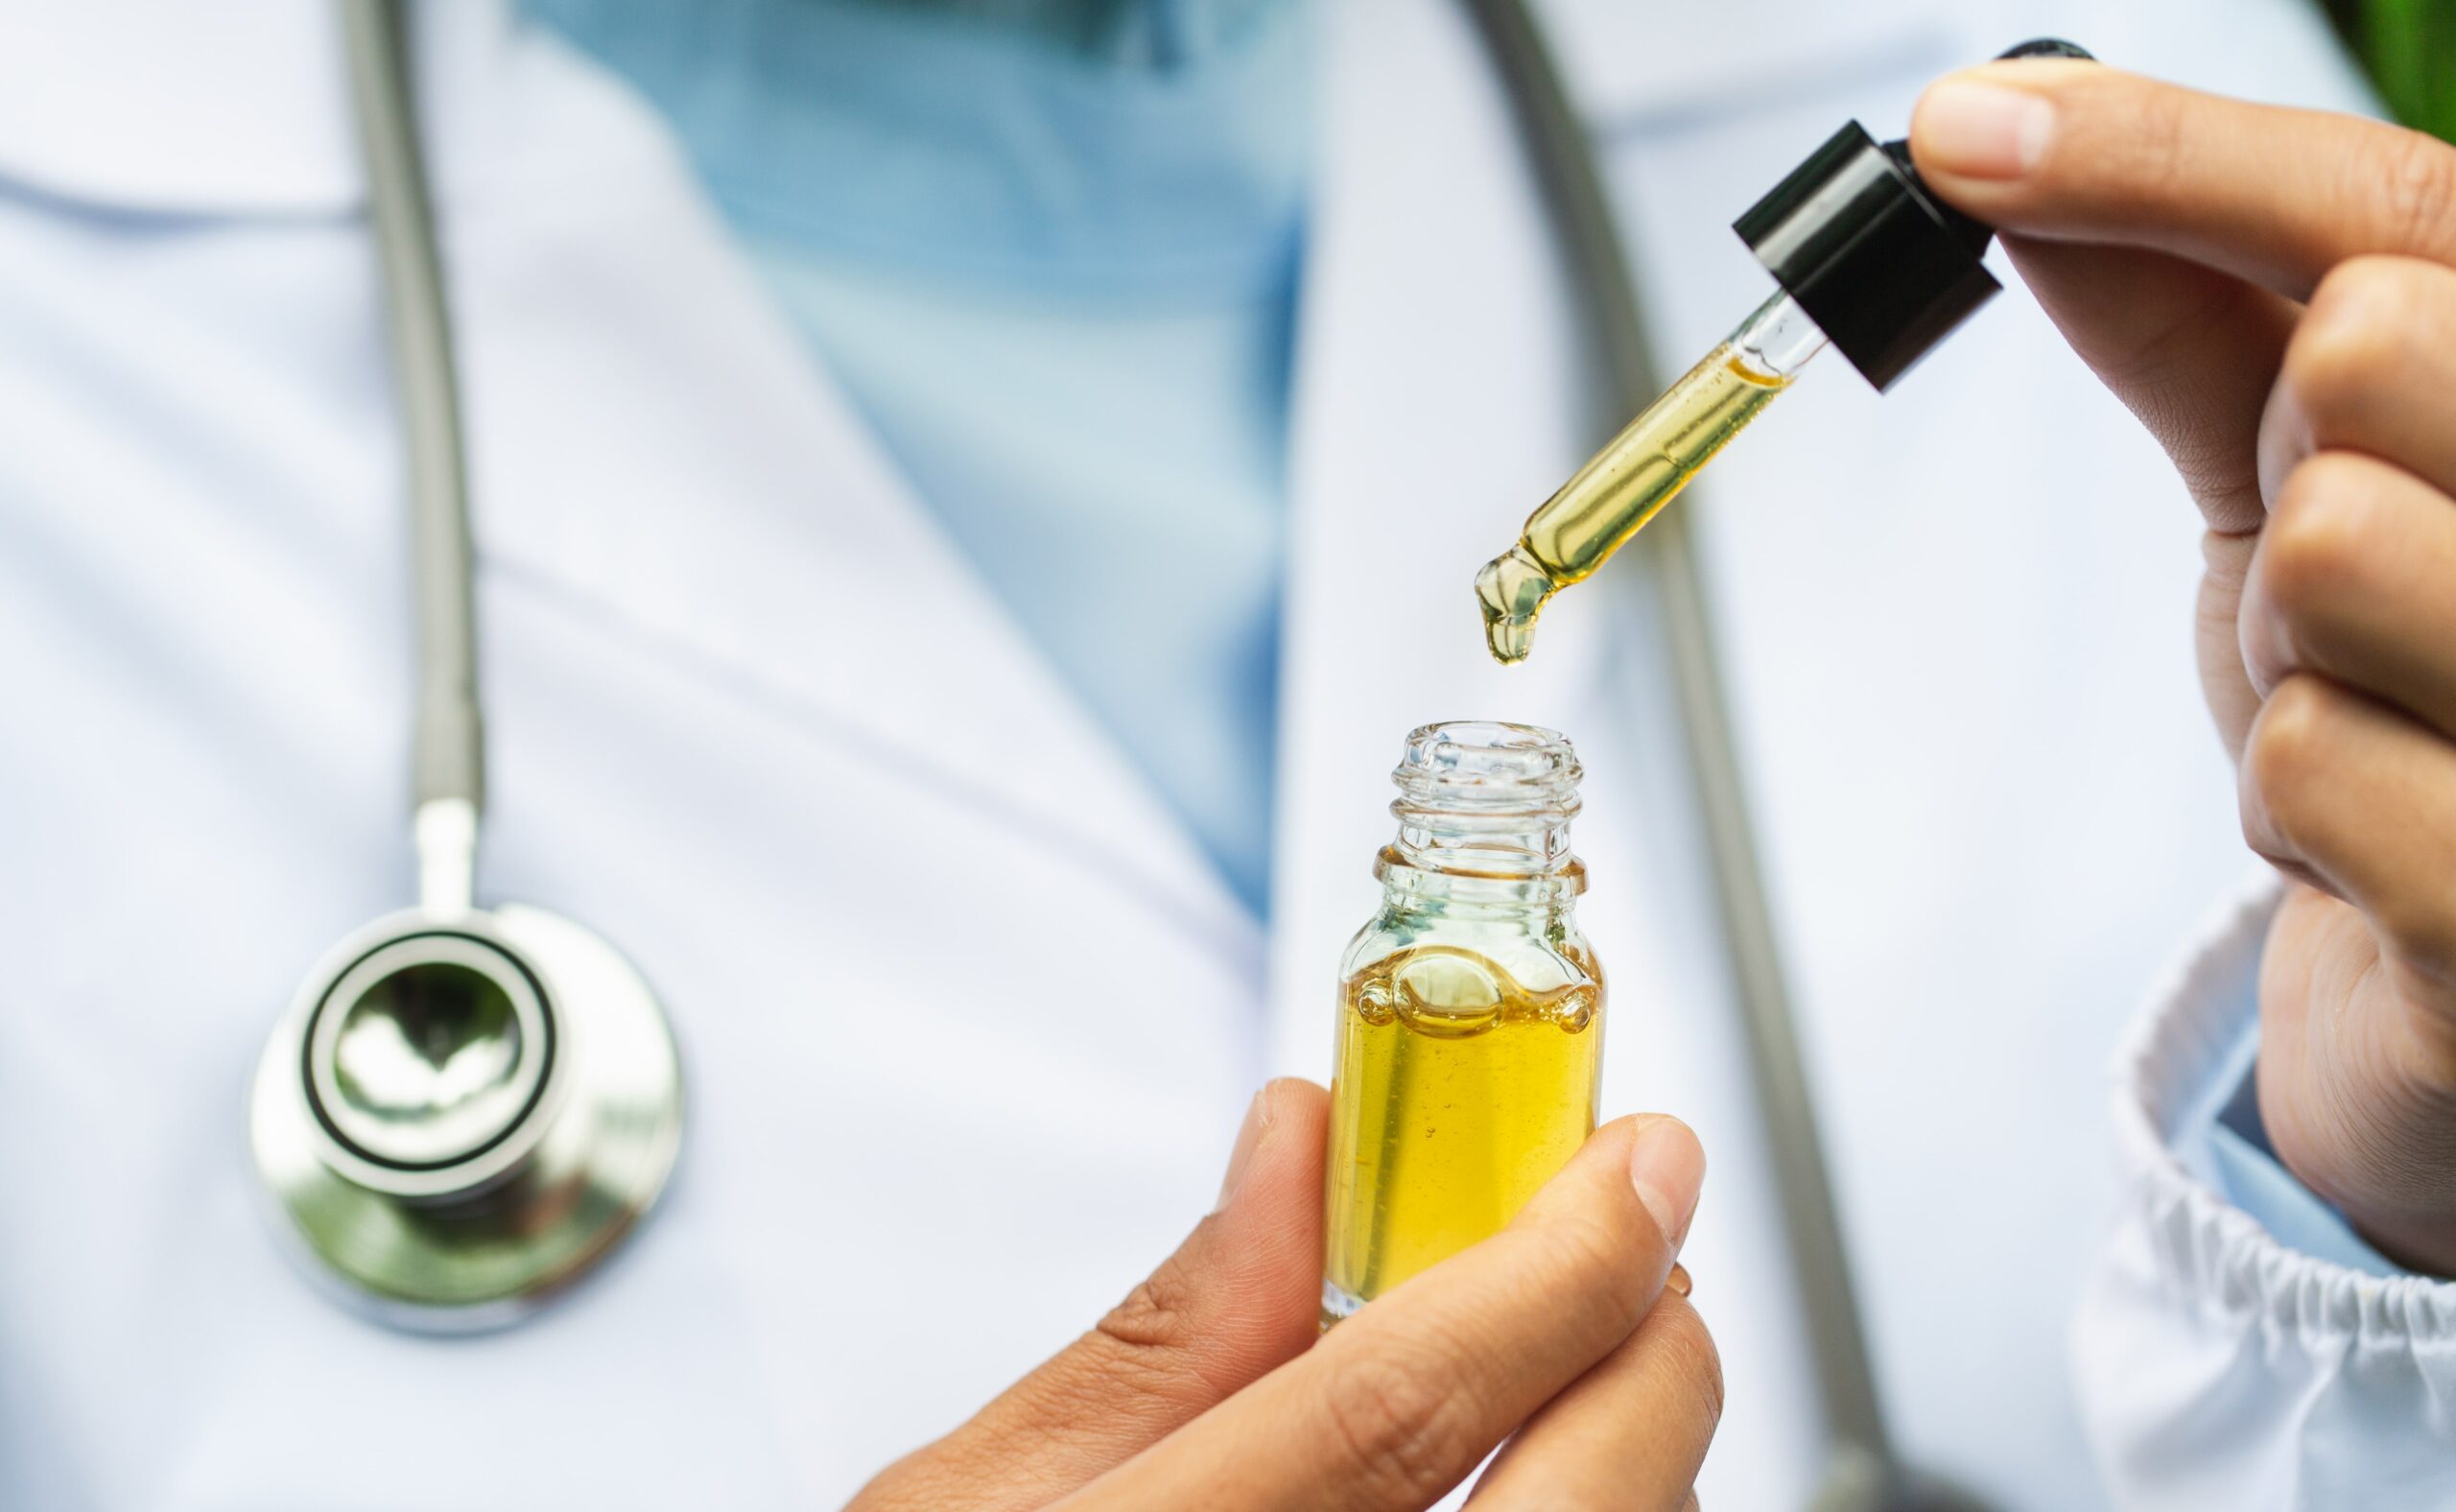 Checkout These 11 Skincare Benefits of CBD Oil